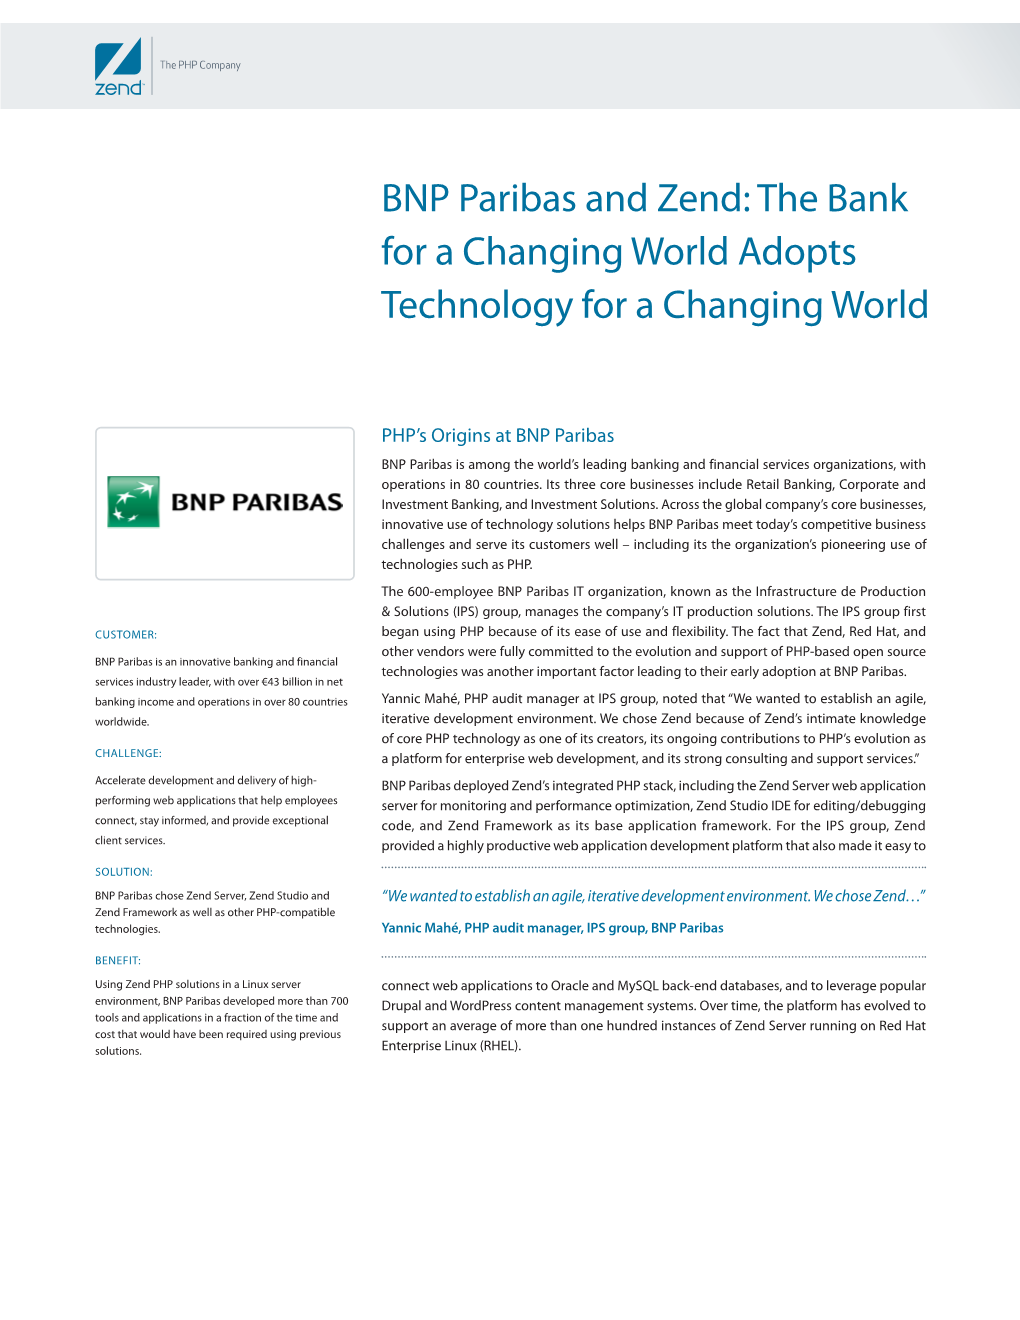 BNP Paribas and Zend: the Bank for a Changing World Adopts Technology for a Changing World